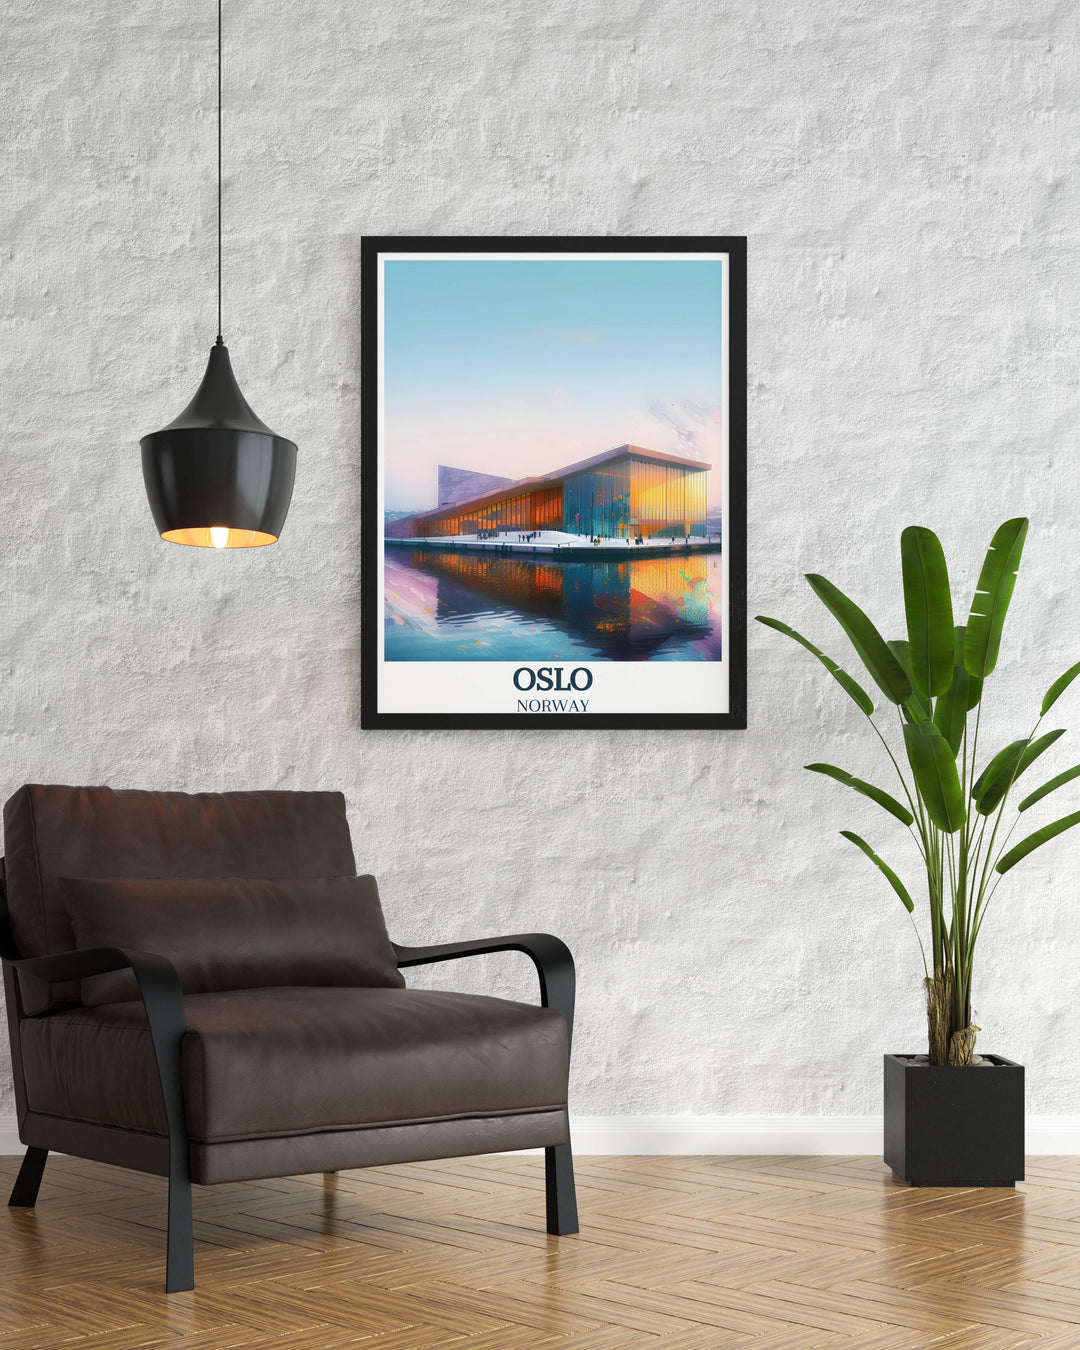 Framed art print of Oslo, showcasing the citys blend of historic architecture and modern design, ideal for Scandinavian decor enthusiasts.